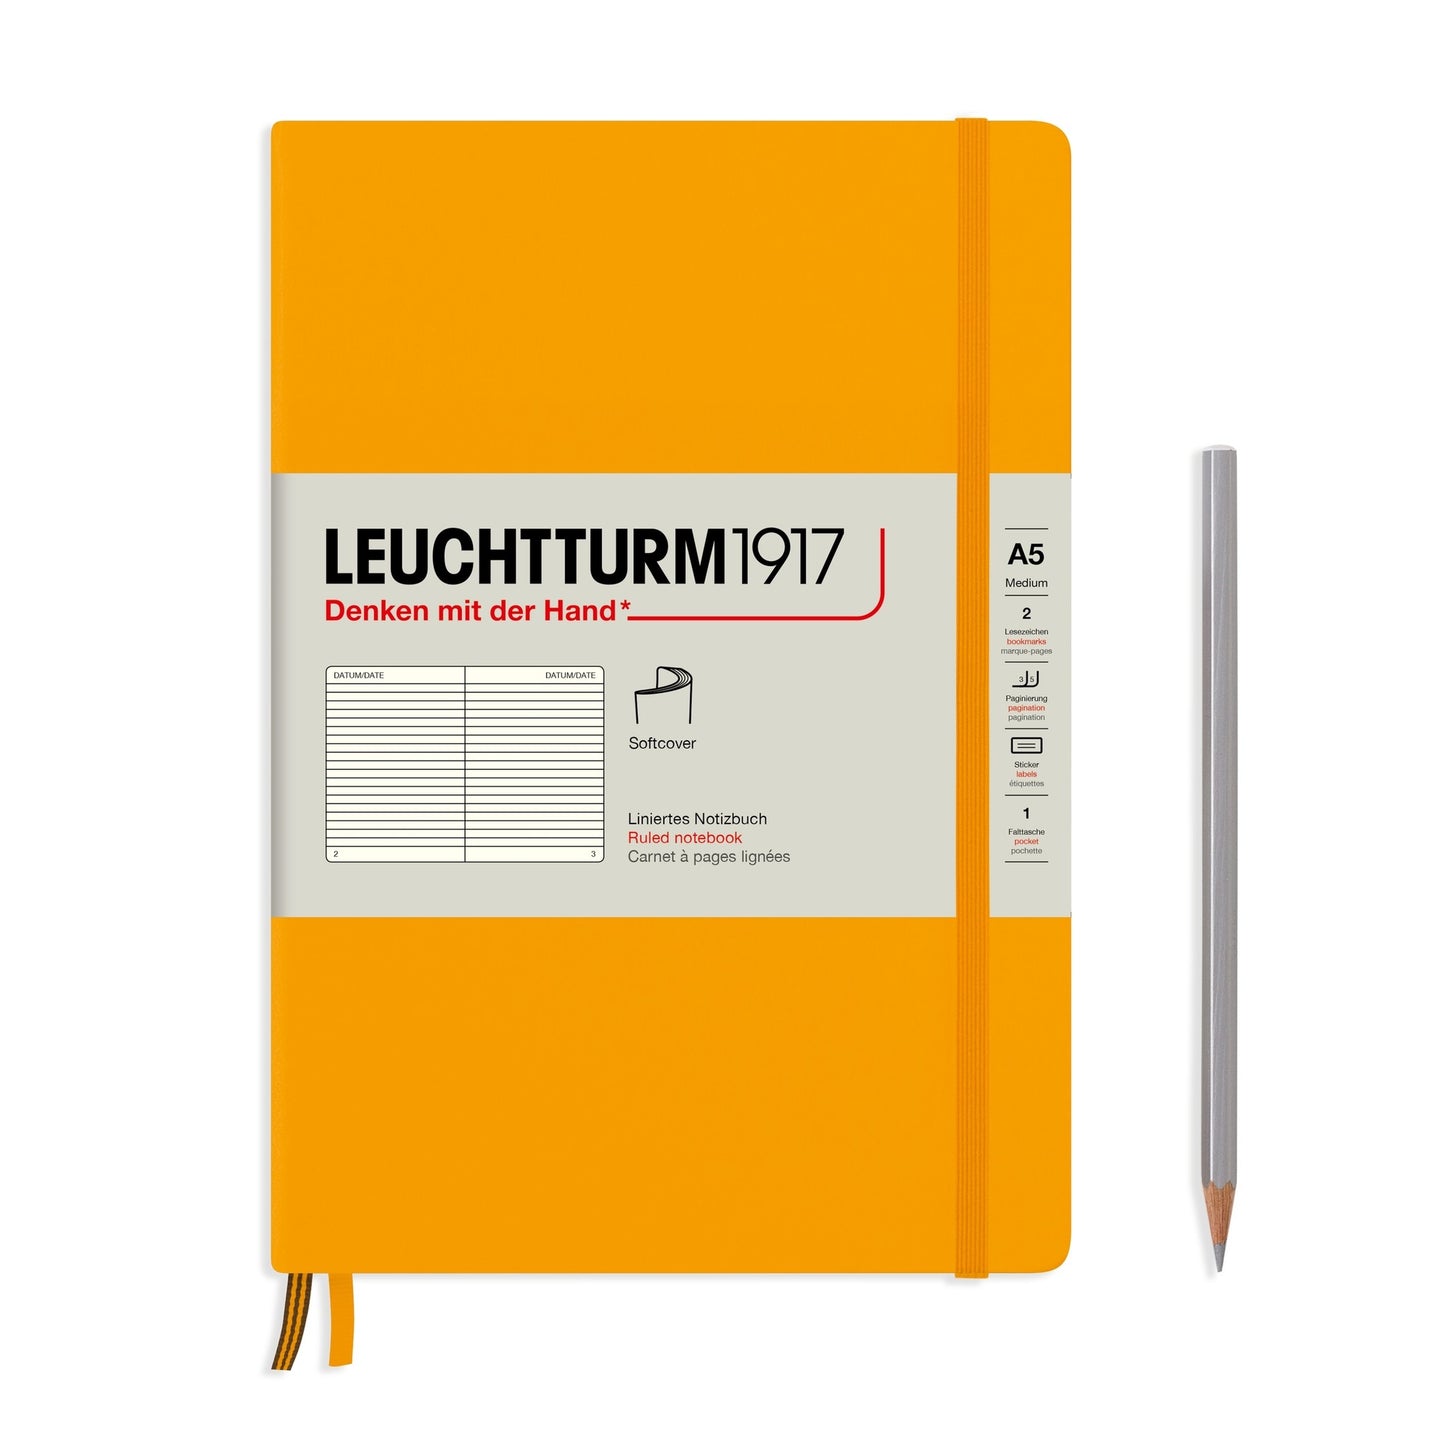 Notebook Softcover Medium (A5) - 123 Pages - Ruled